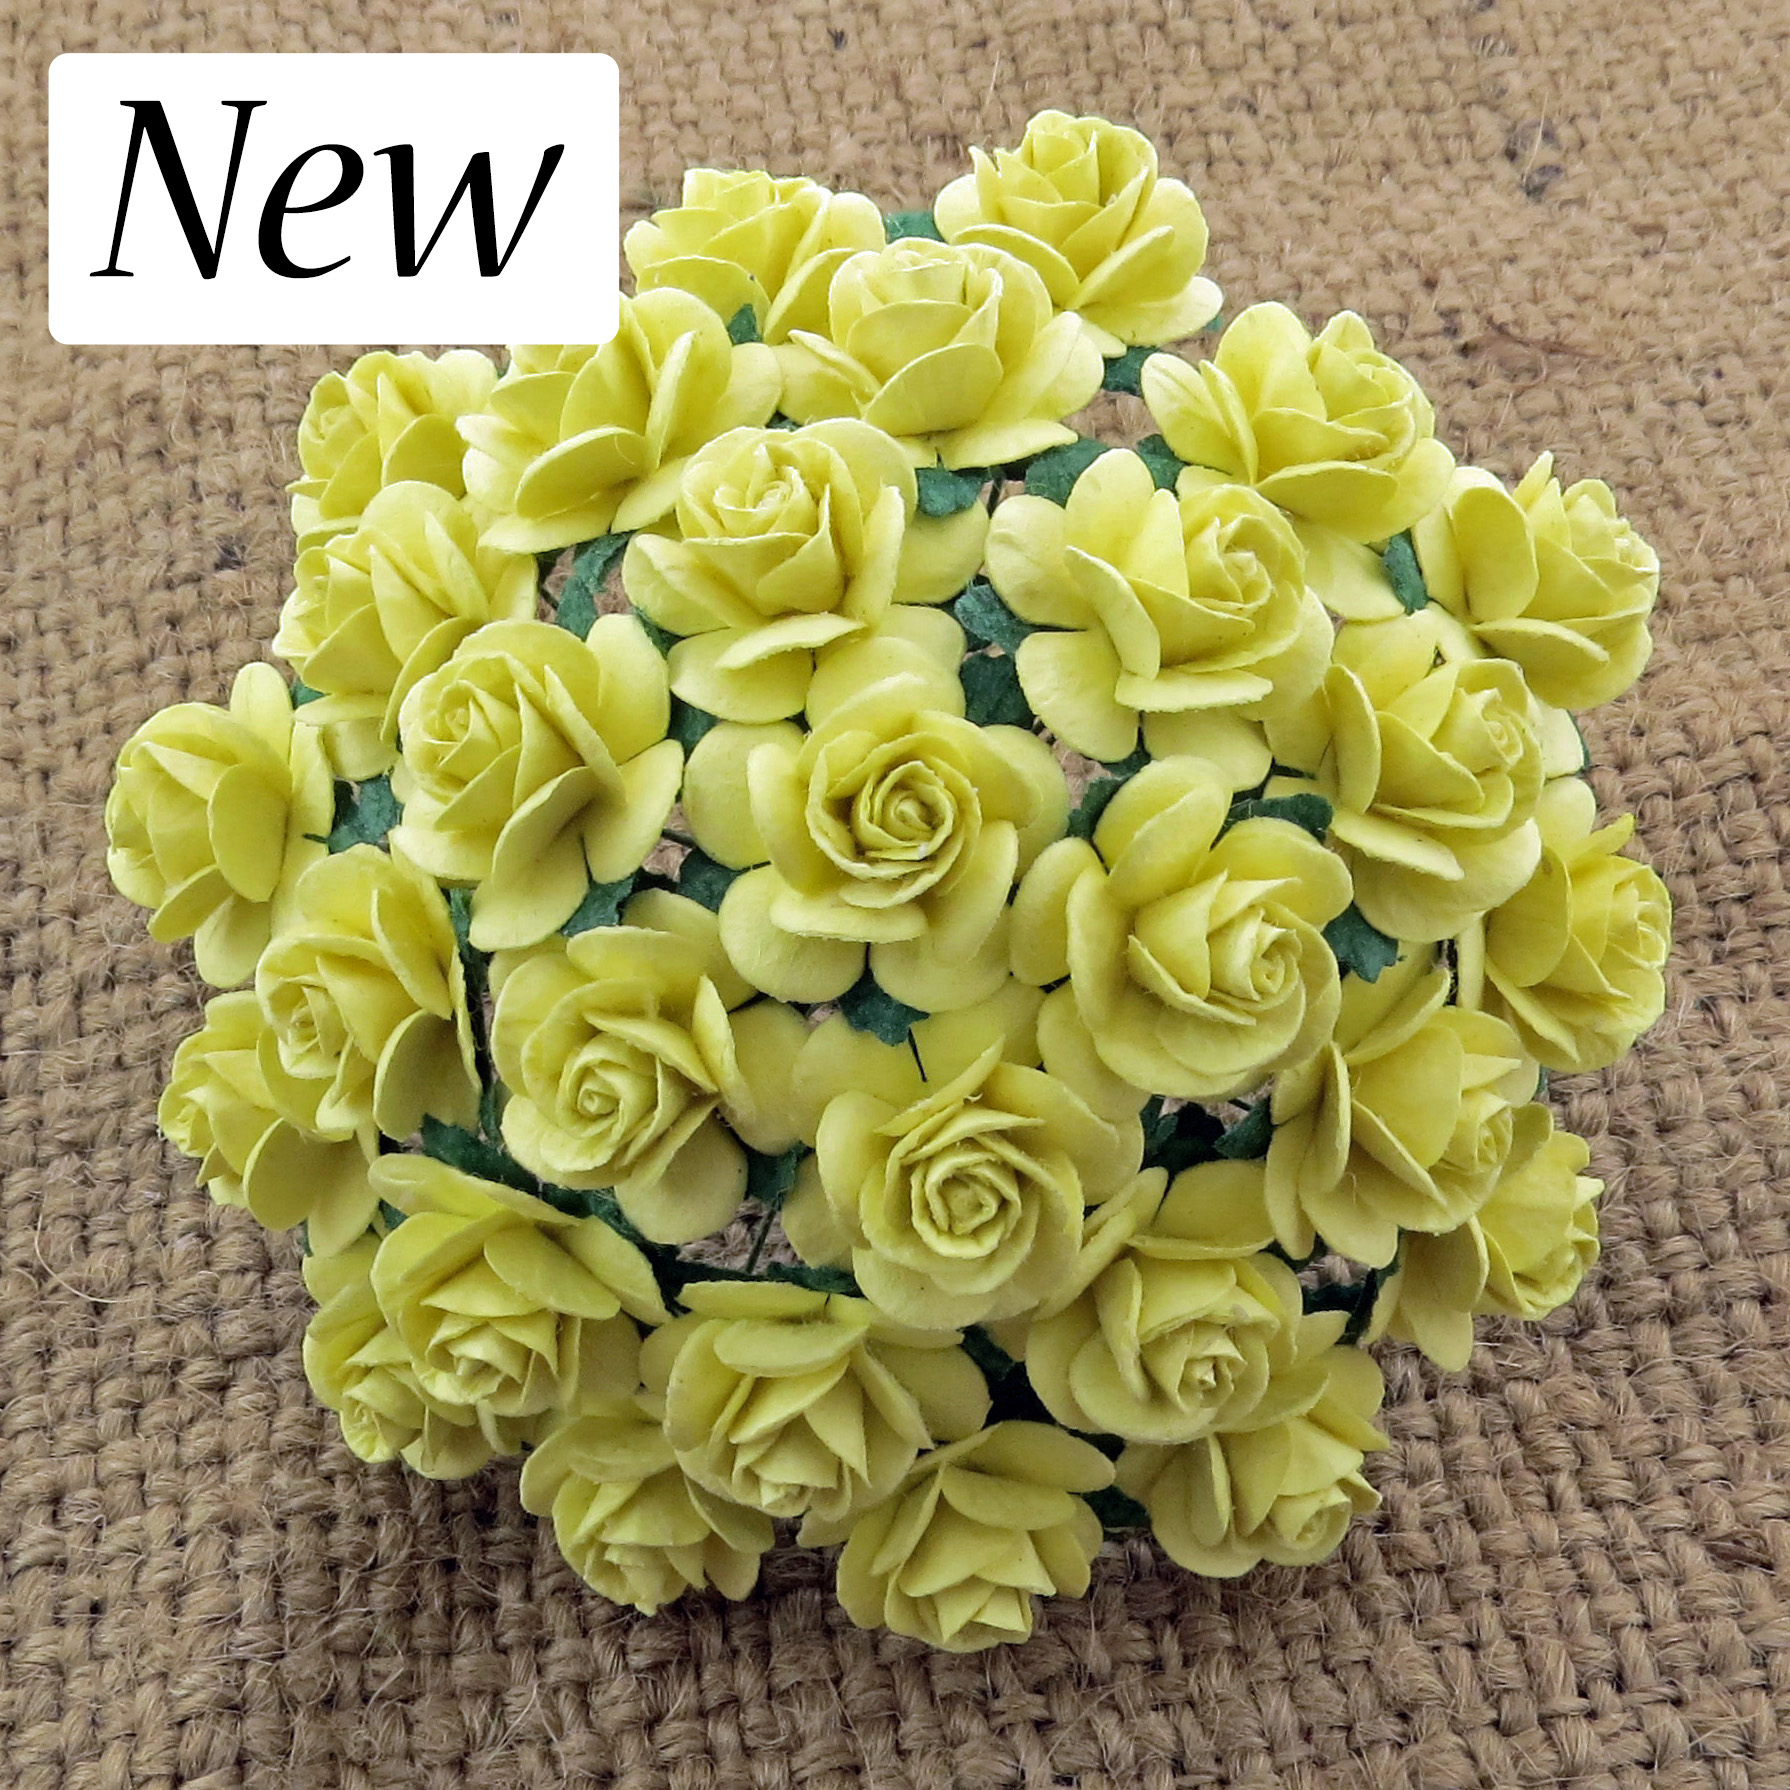 100 LEMON YELLOW MULBERRY PAPER OPEN ROSES